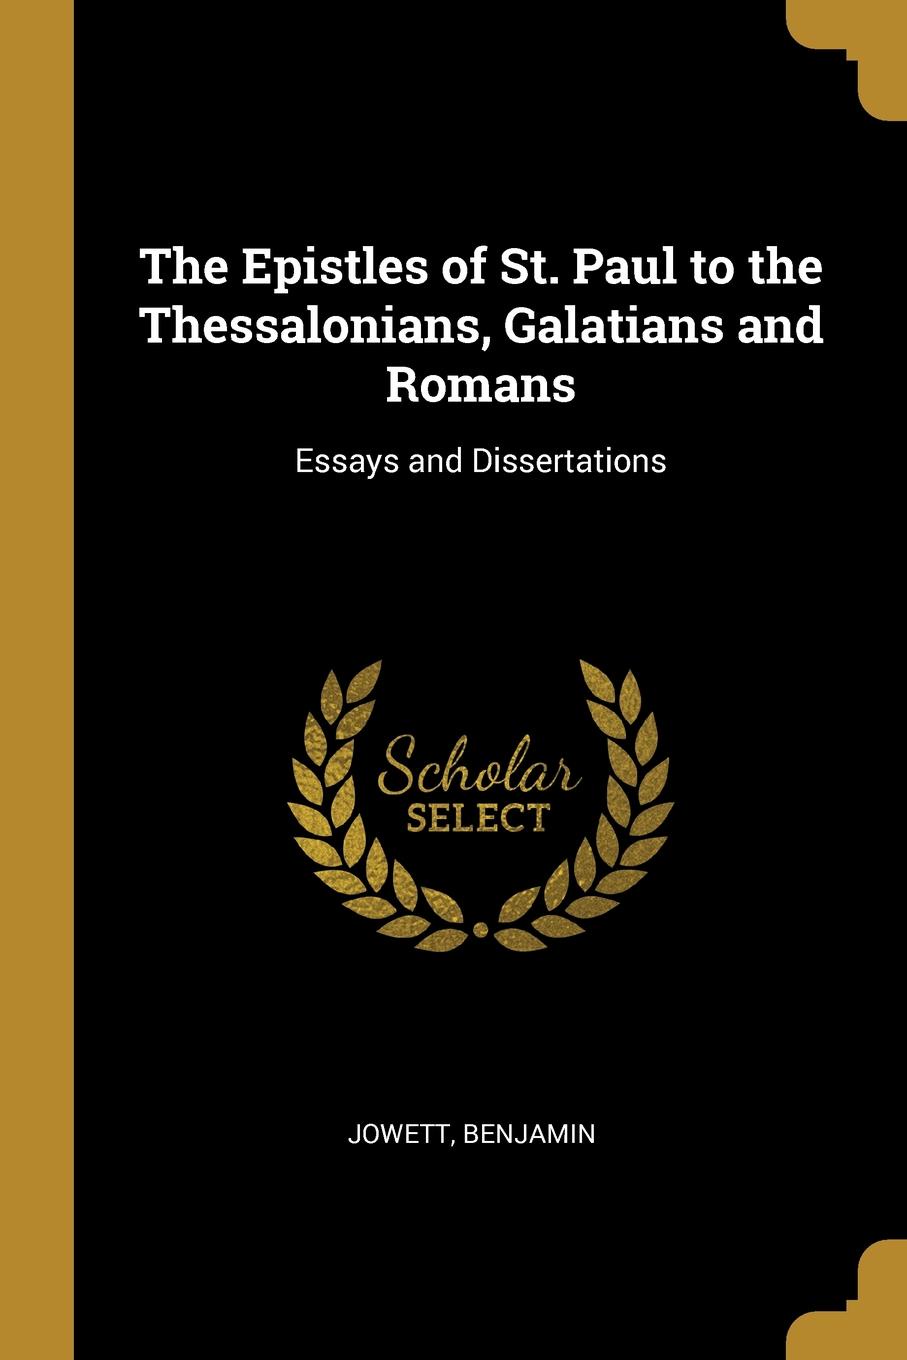 The Epistles of St. Paul to the Thessalonians, Galatians and Romans. Essays and Dissertations